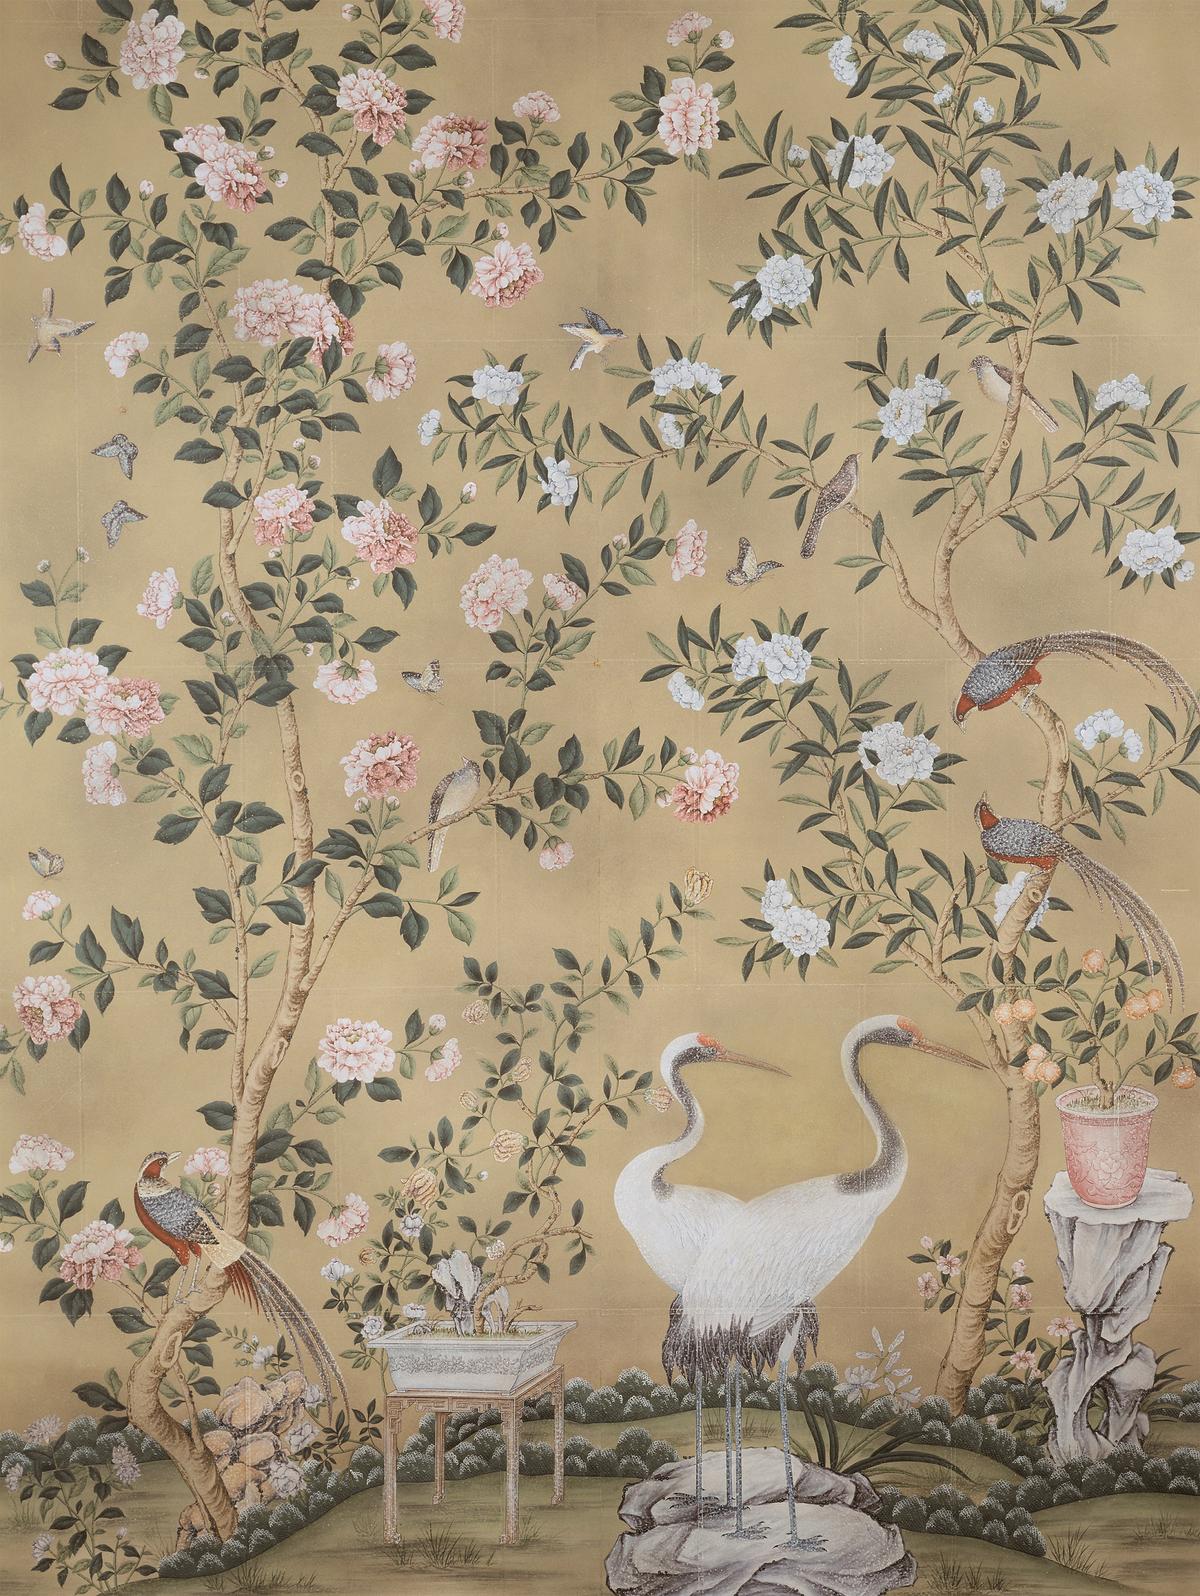 A hand-painted Chinoiserie wallpaper by Gracie Studio features birds and flowering trees. (Courtesy of Gracie Studio)